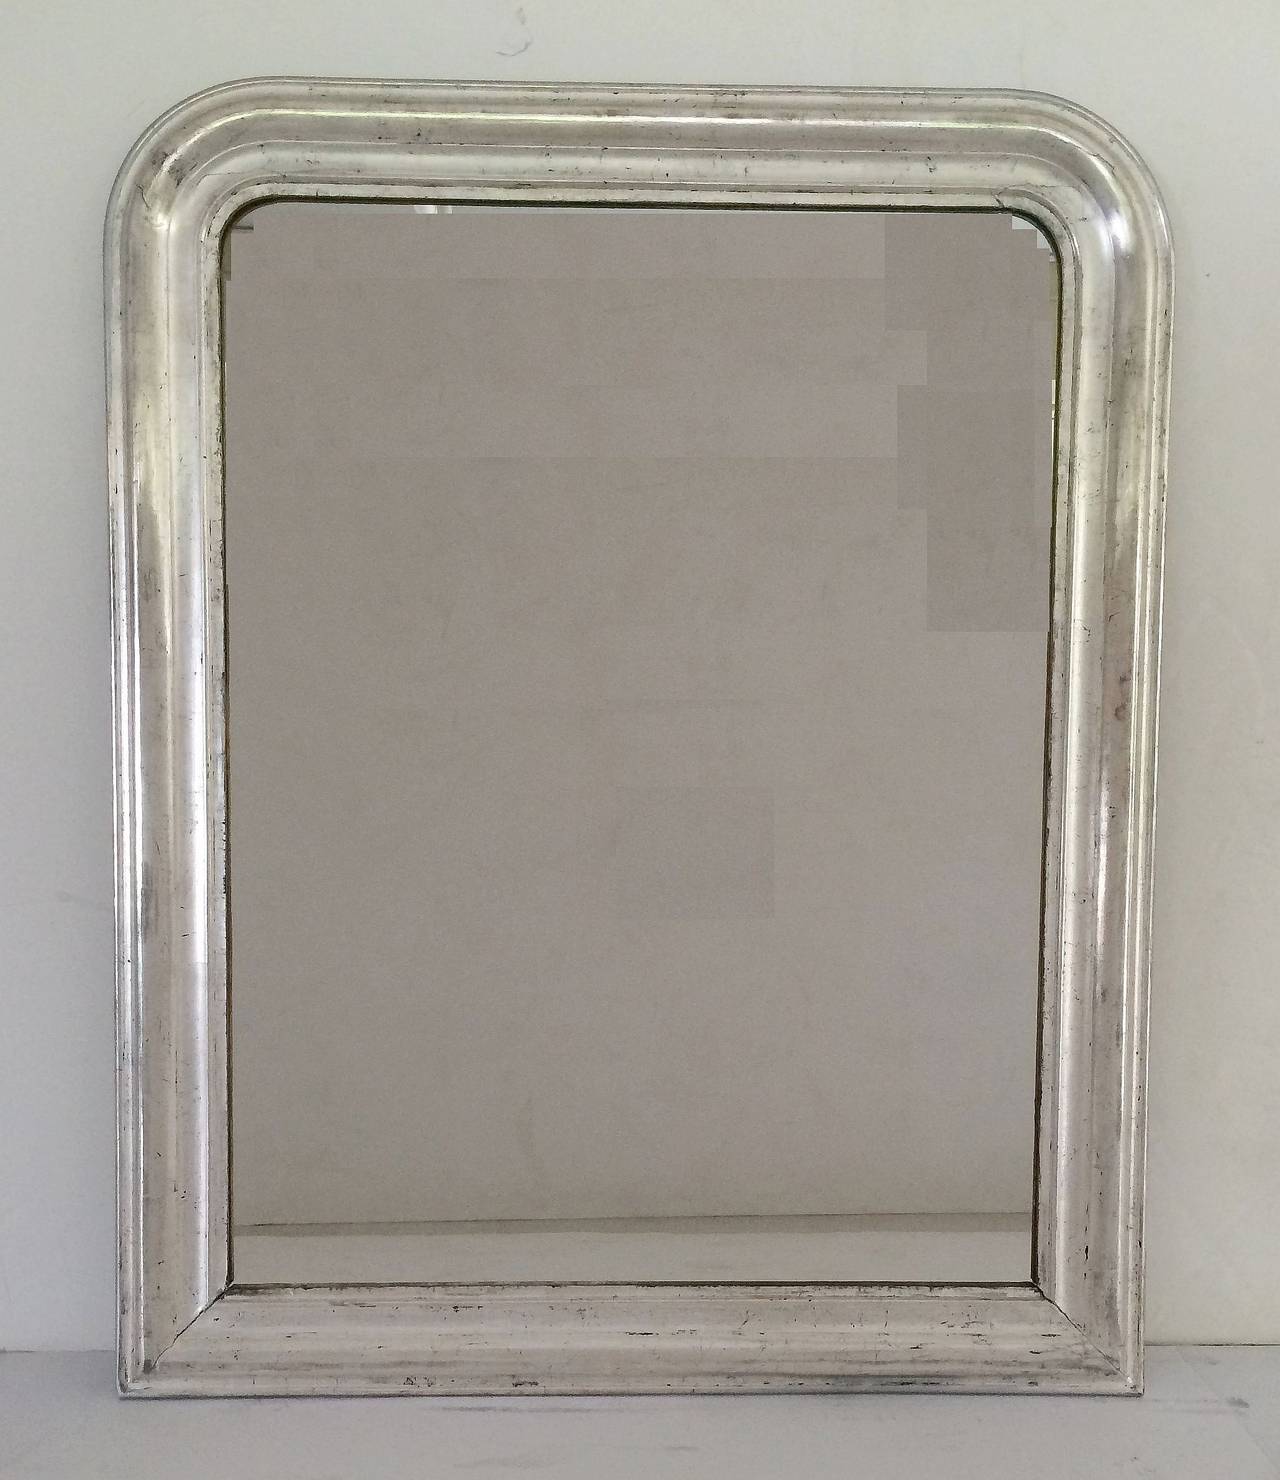 A handsome large Louis Philippe wall mirror featuring a moulded surround with silver-leaf overlay.

Dimensions: H 44 inches x W 35 inches

Other sizes available in this style.